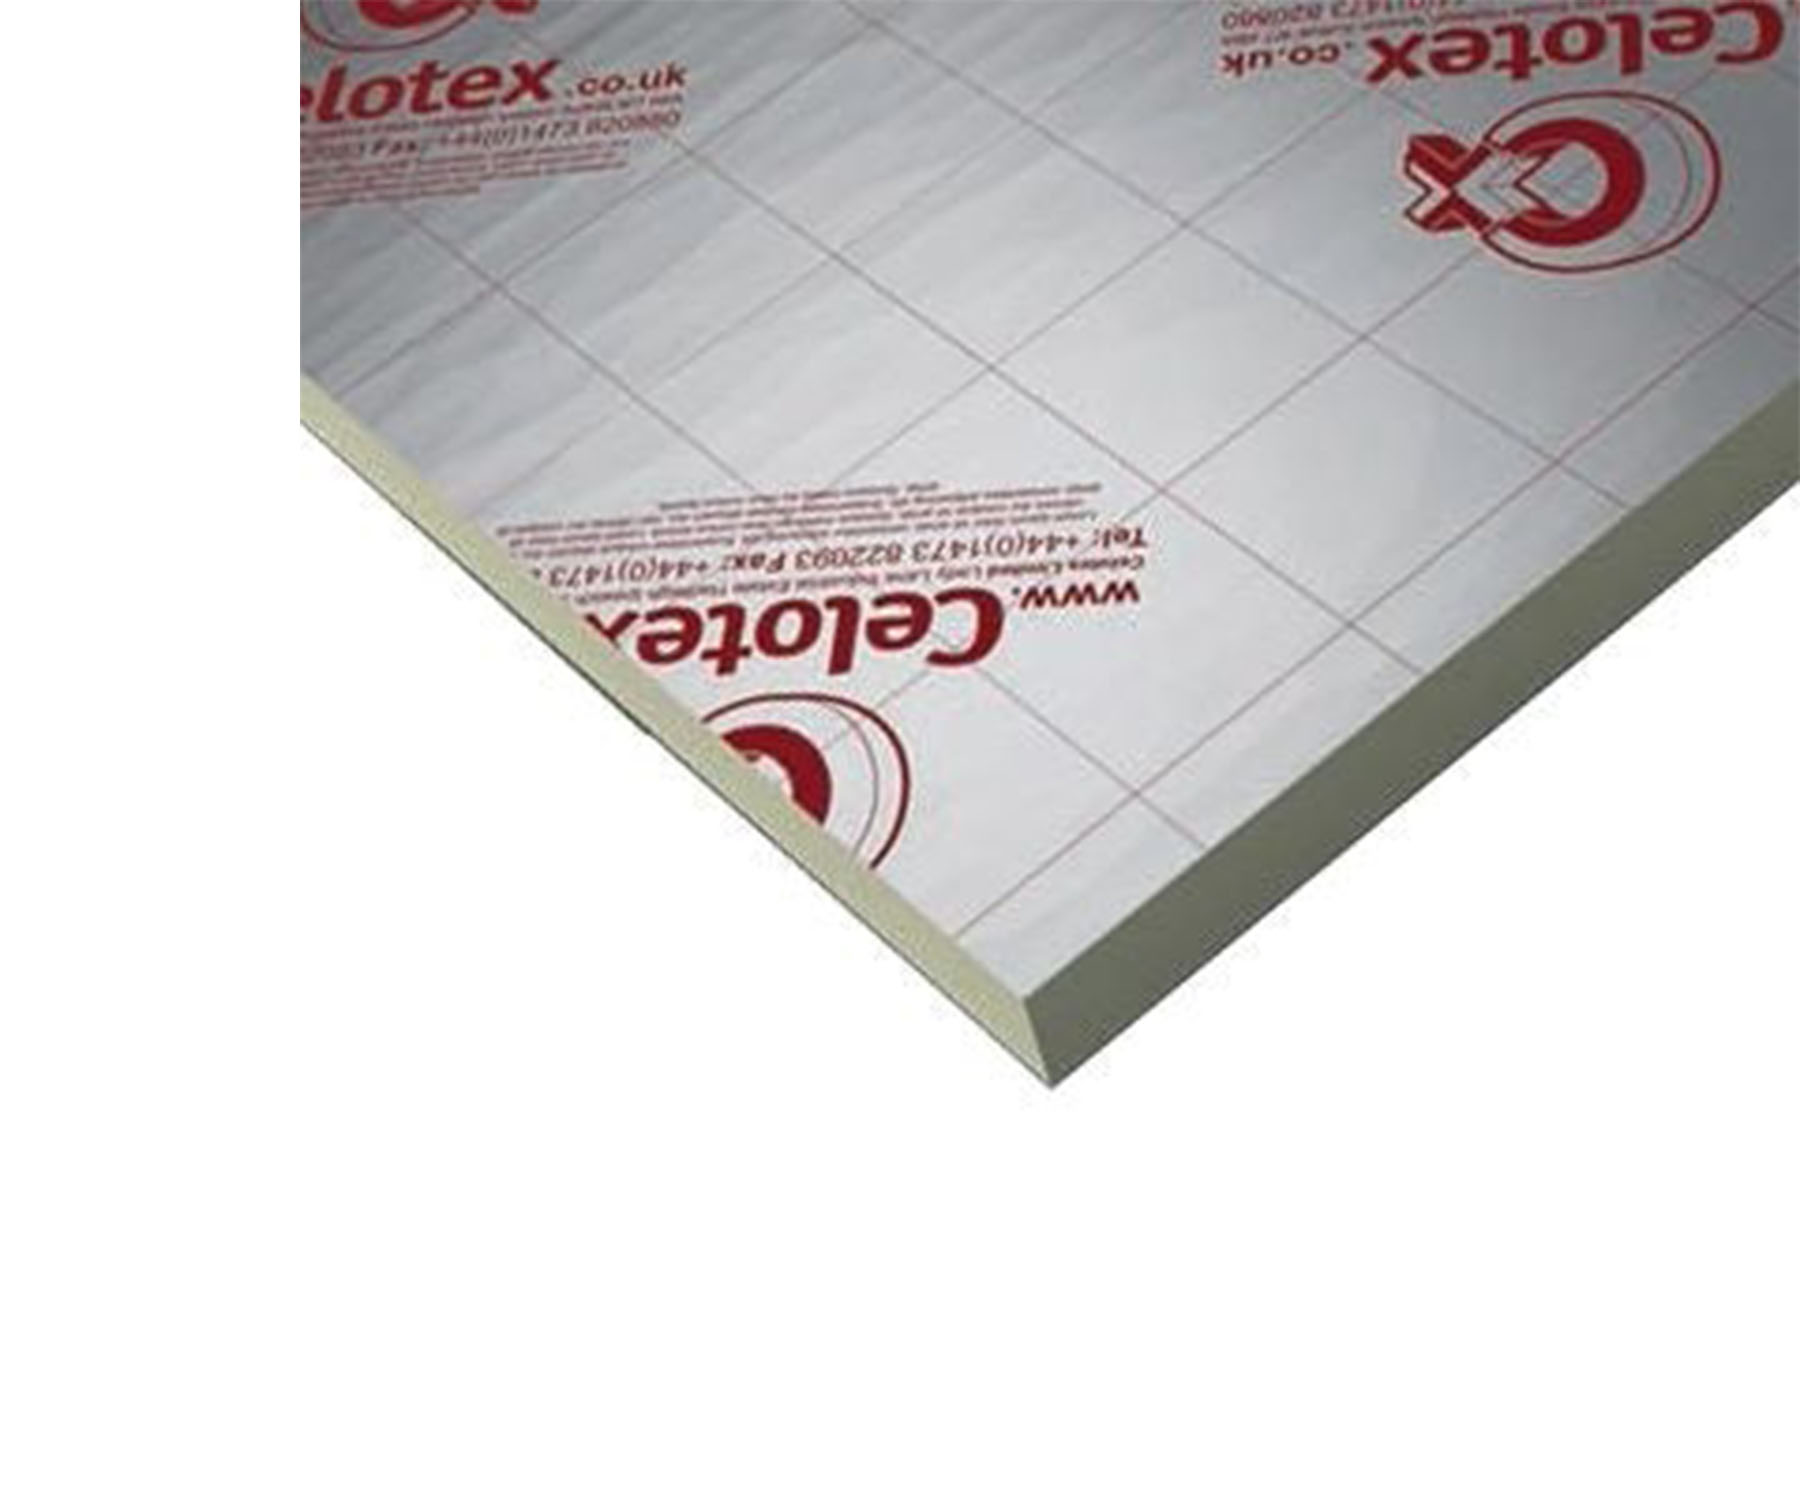 The corner of a single sheet of Celotex insulation board.